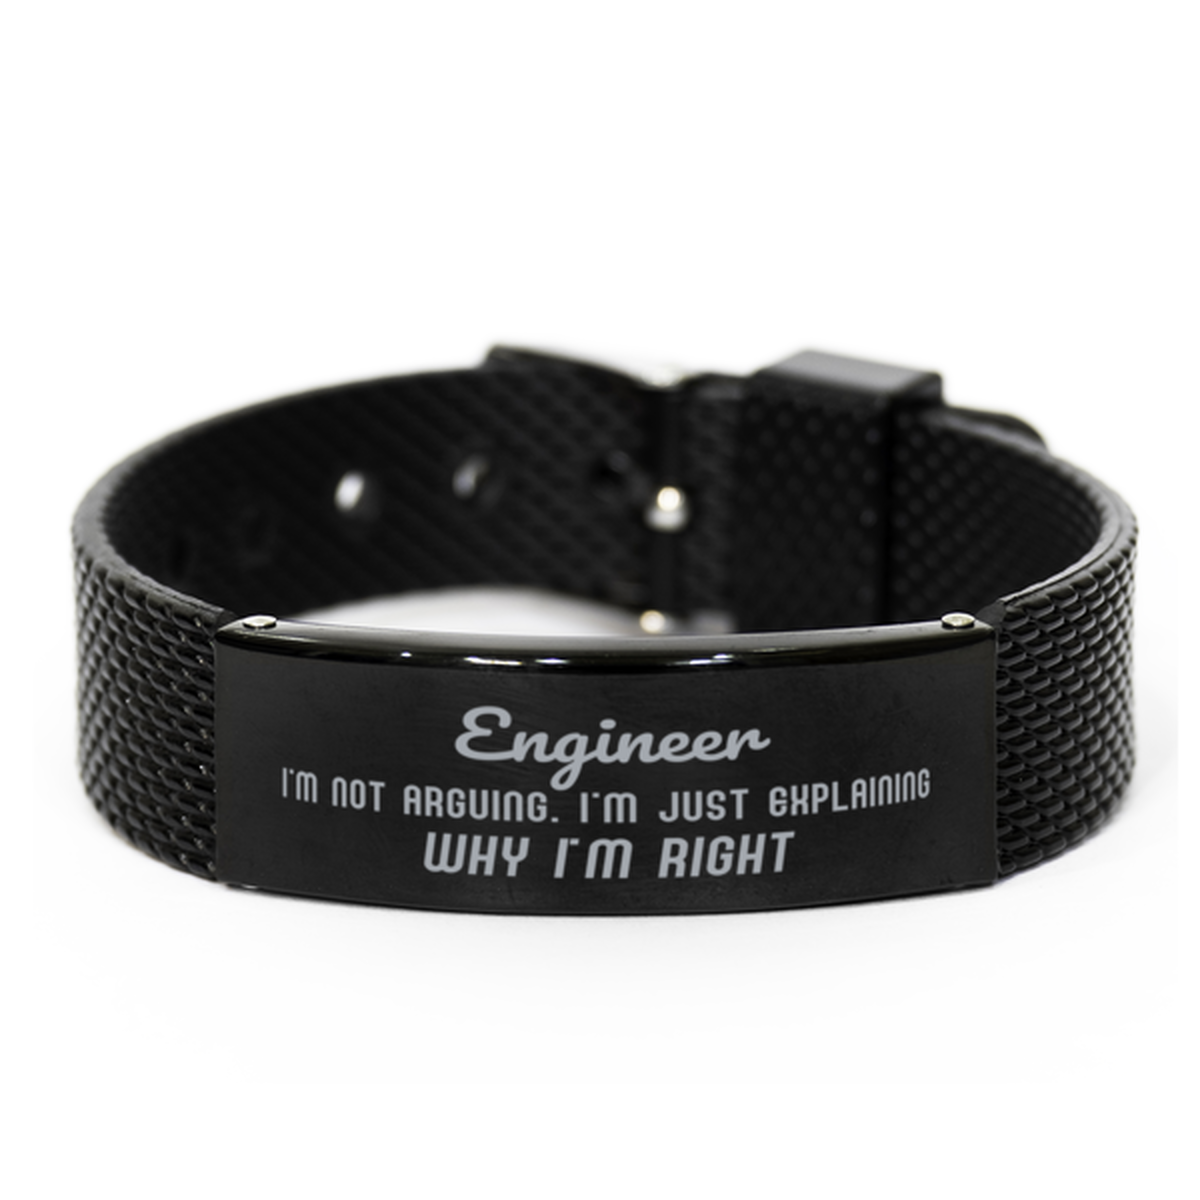 Engineer I'm not Arguing. I'm Just Explaining Why I'm RIGHT Black Shark Mesh Bracelet, Funny Saying Quote Engineer Gifts For Engineer Graduation Birthday Christmas Gifts for Men Women Coworker